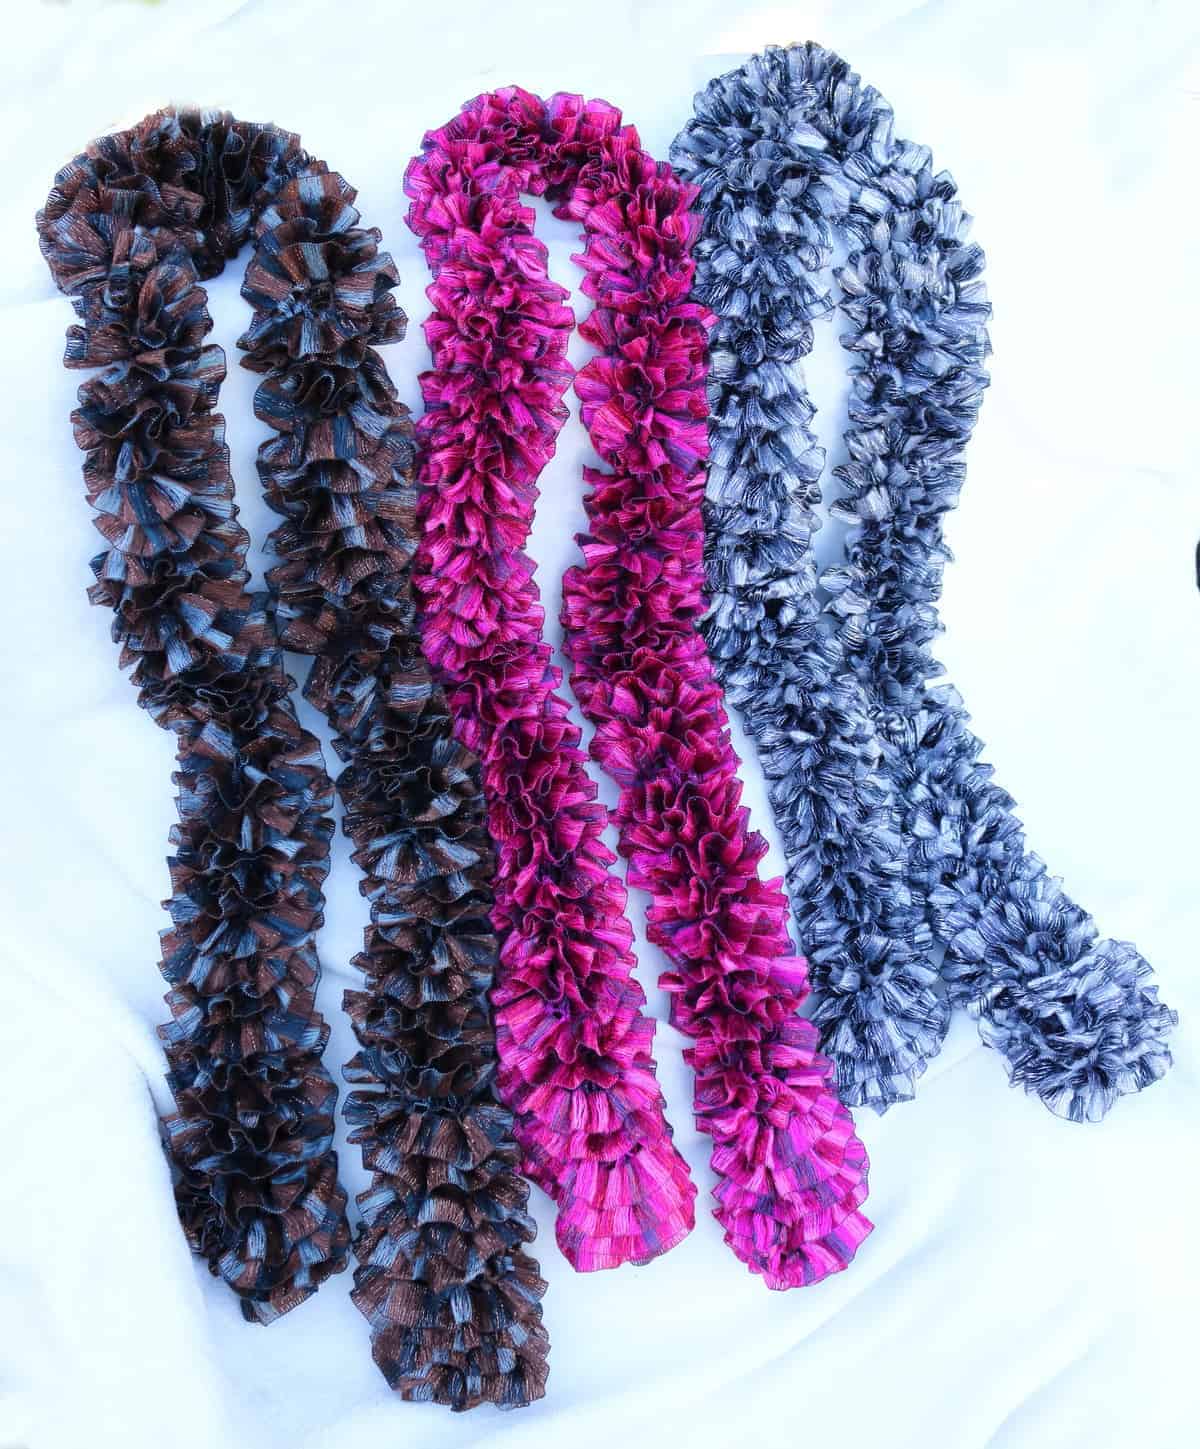 3 scarves- brown, pink, and gray with silver